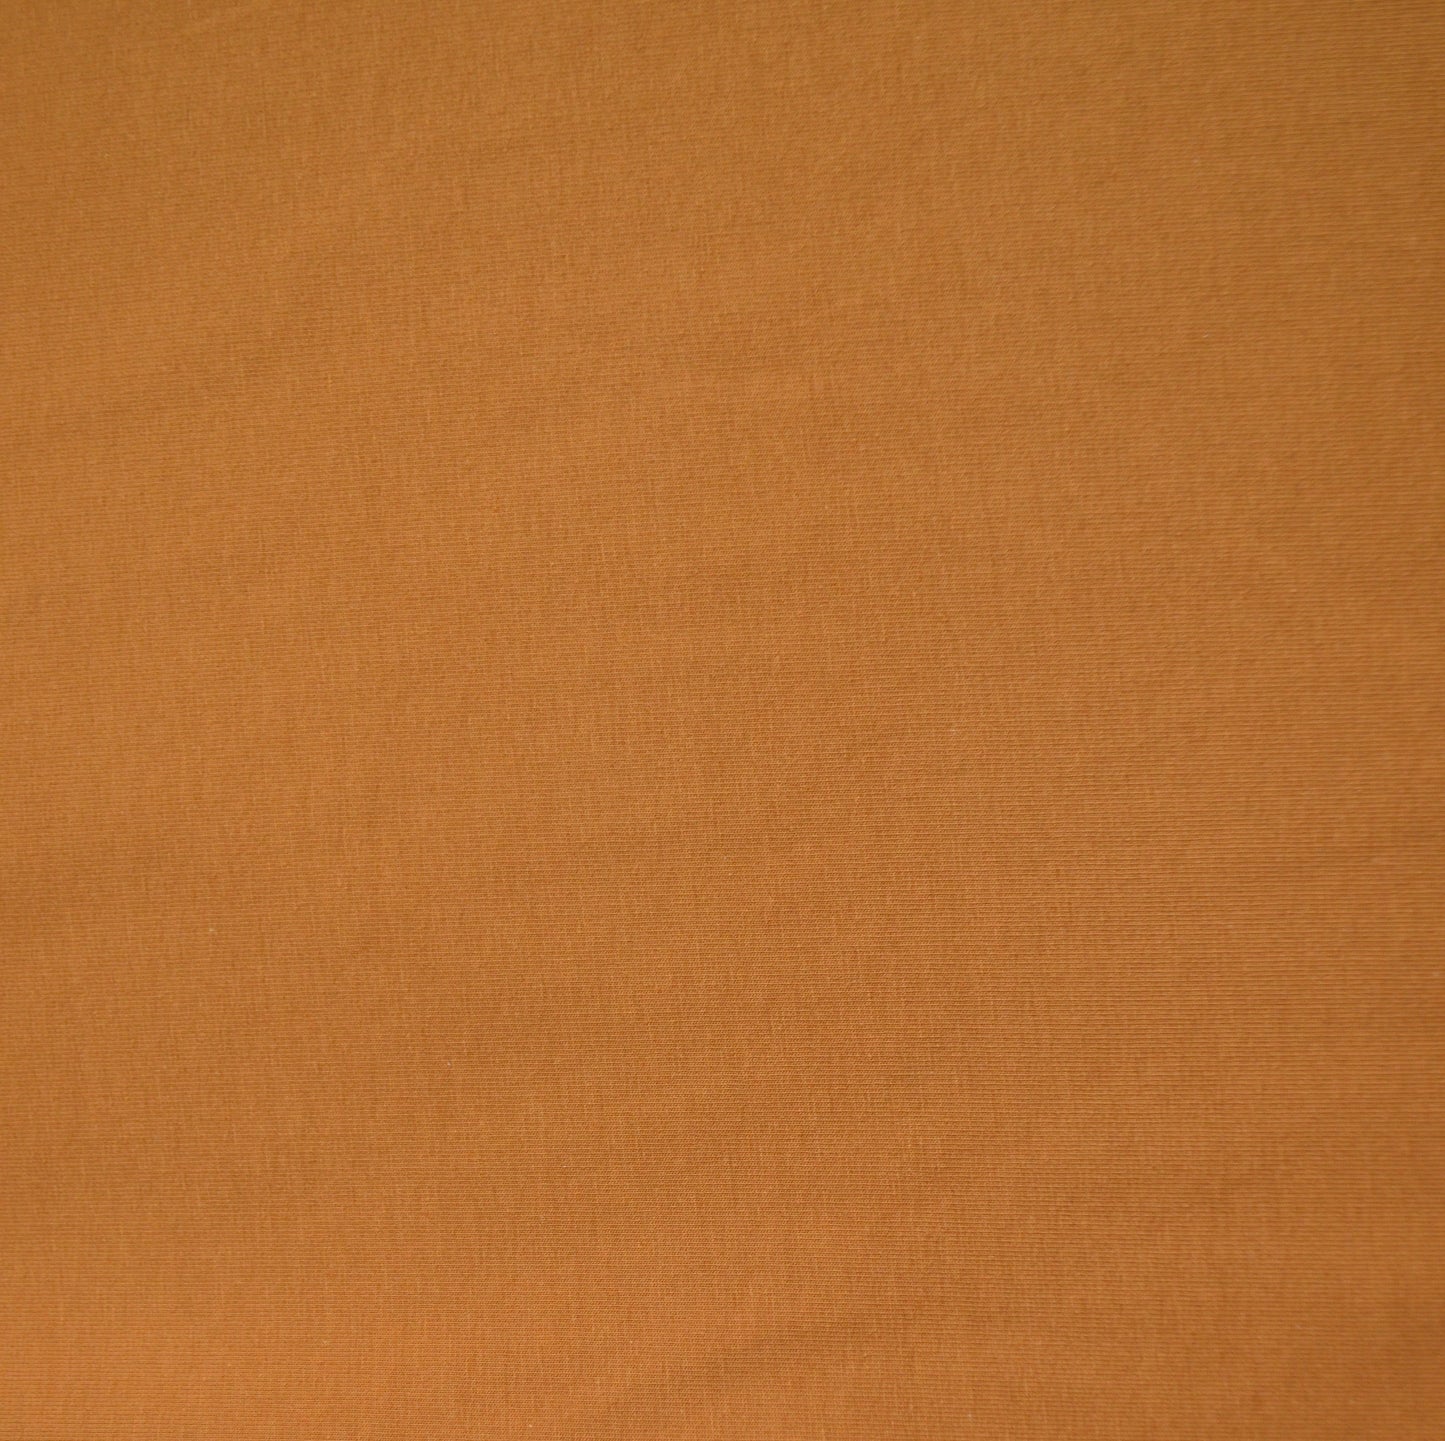 Cotton/Elastane French Terry in Caramel